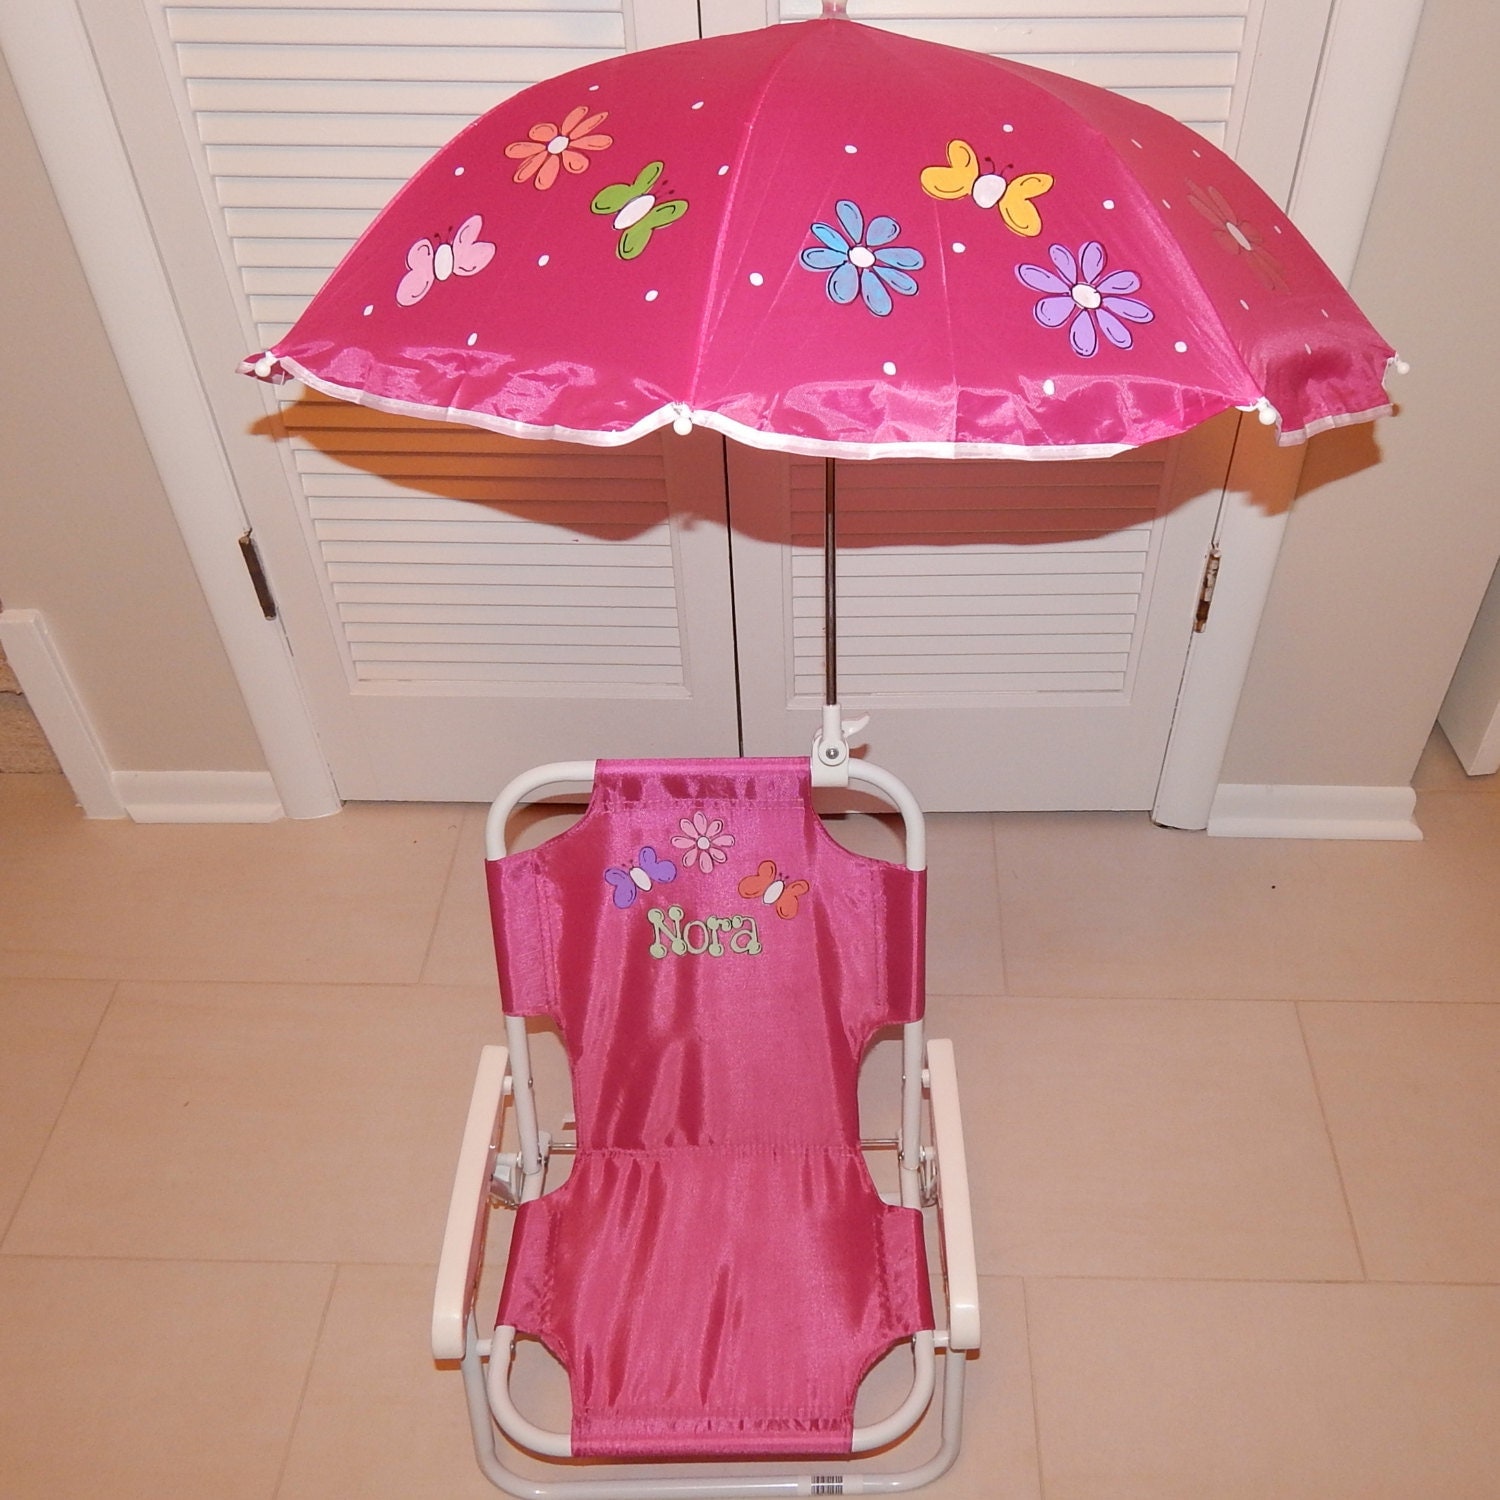 Modern Personalized Toddler Beach Chair With Umbrella for Simple Design